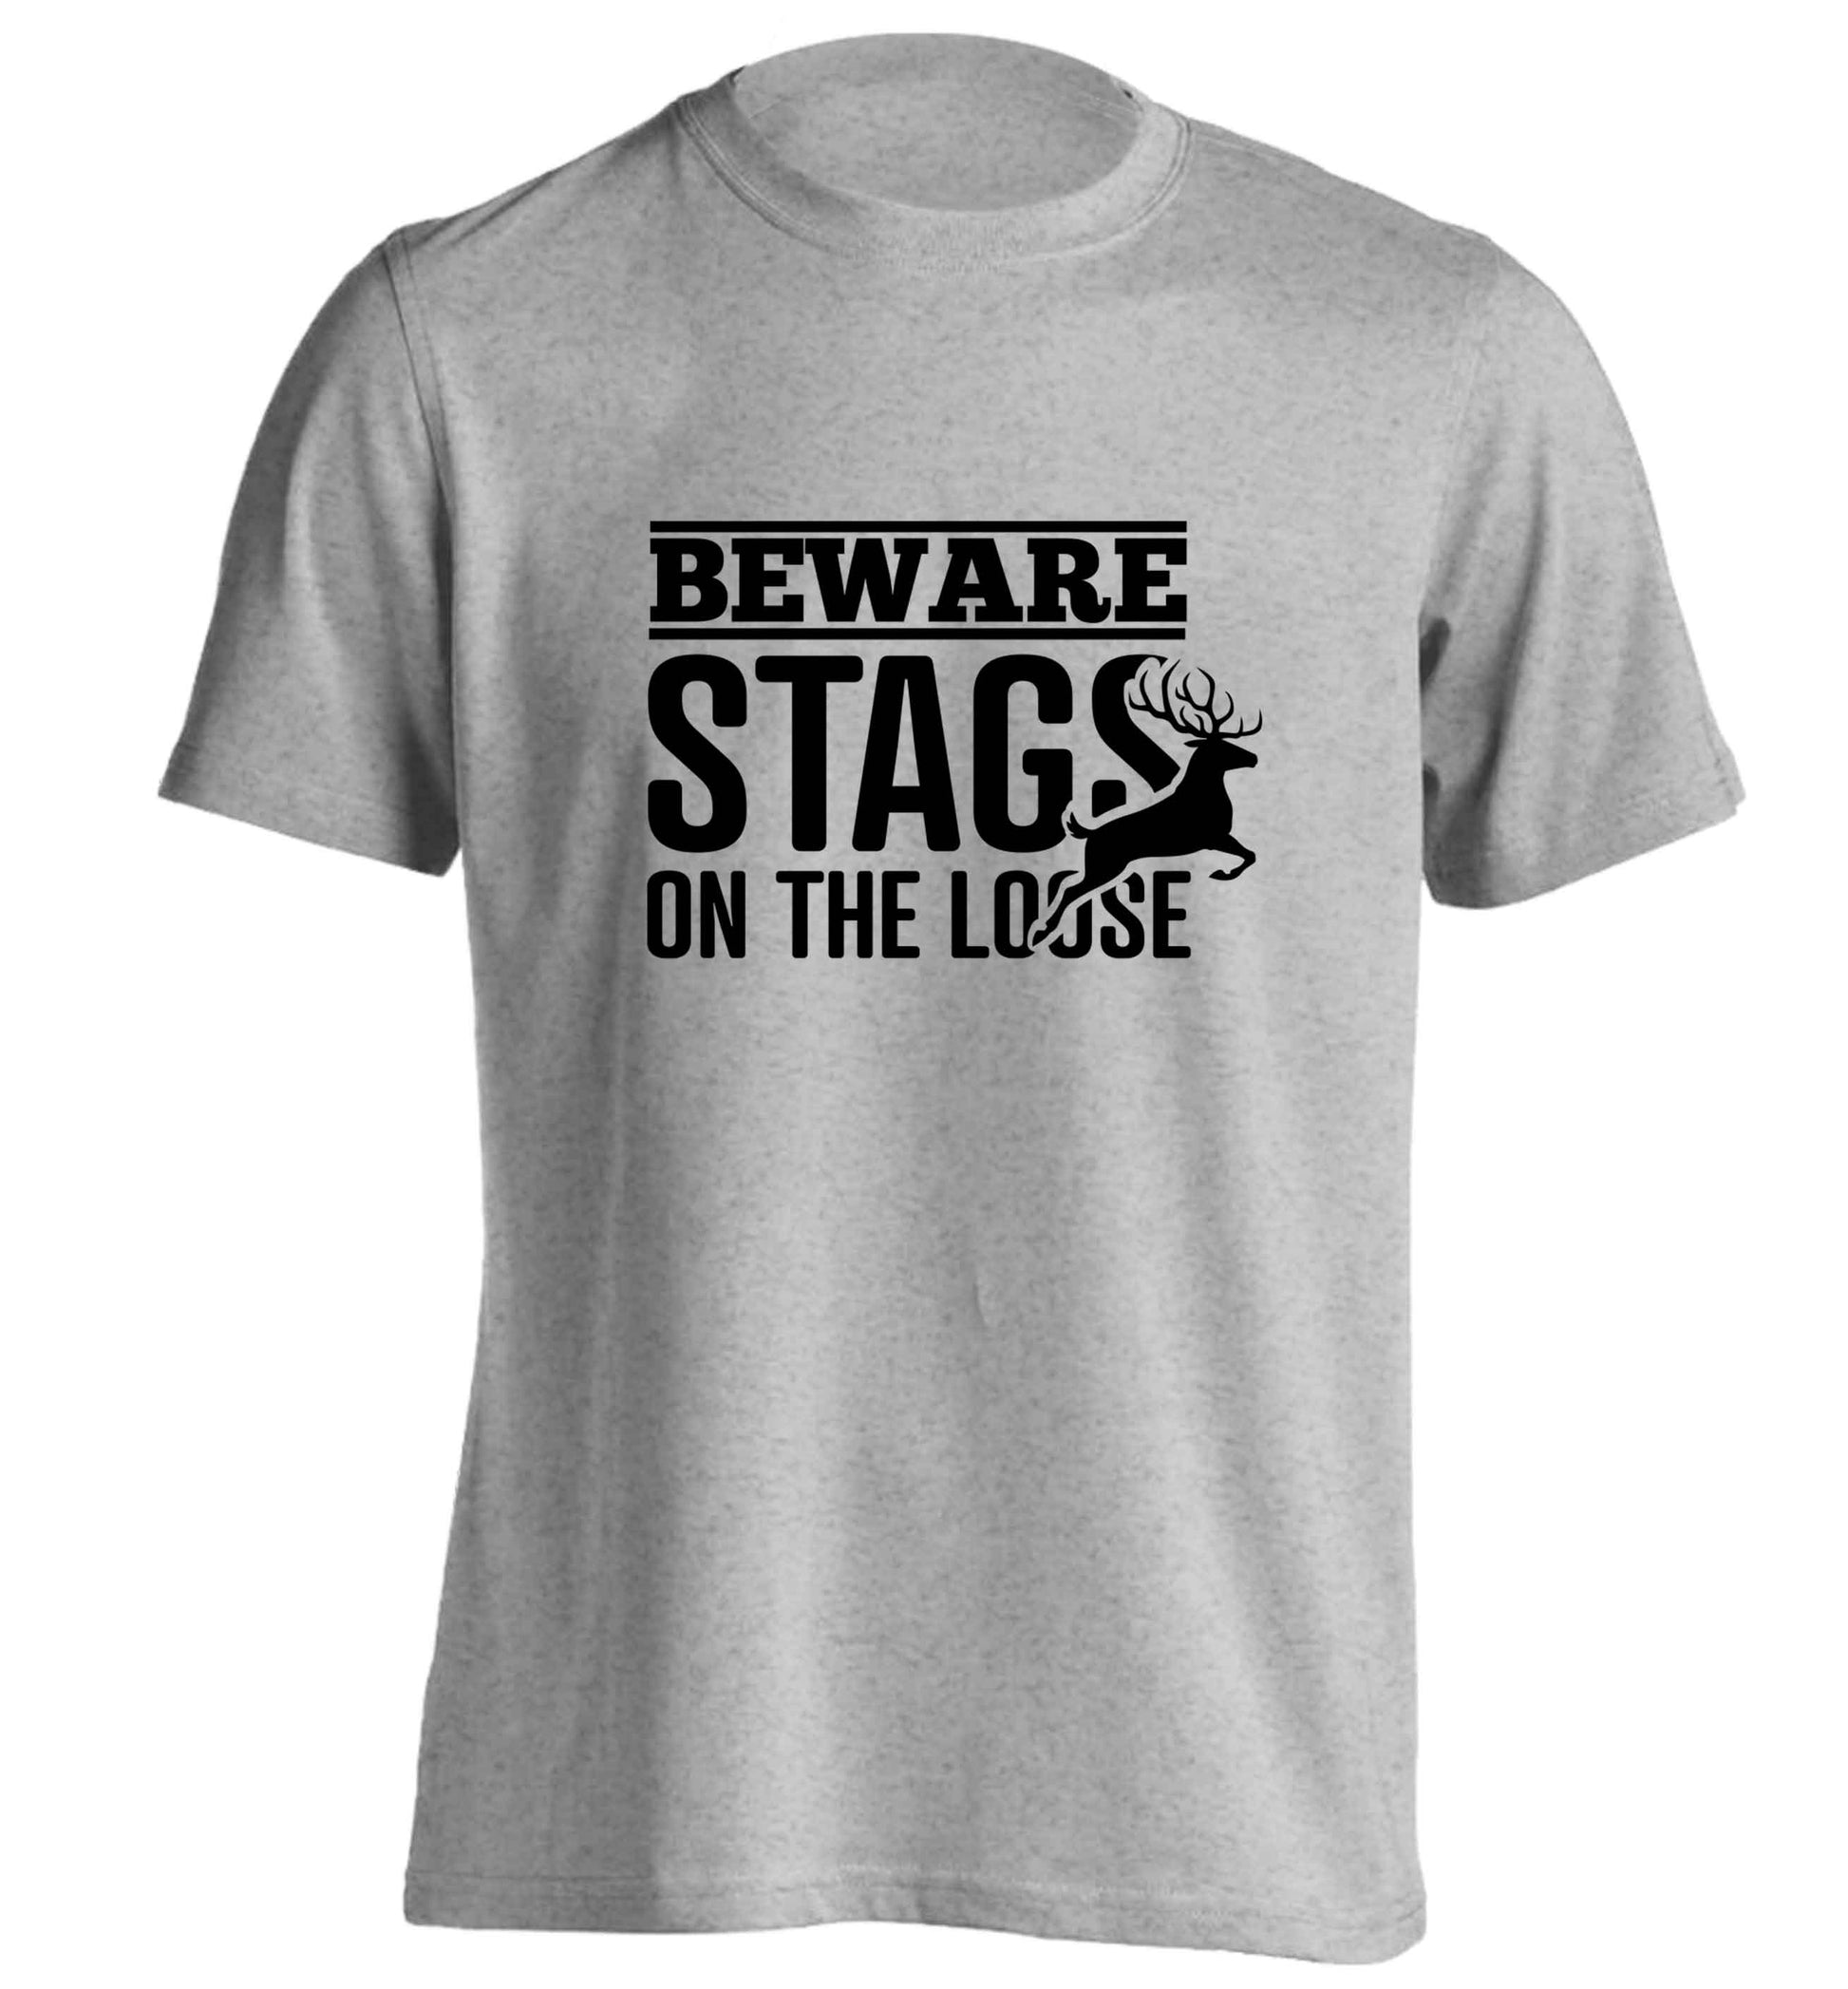 Beware stags on the loose adults unisex grey Tshirt 2XL